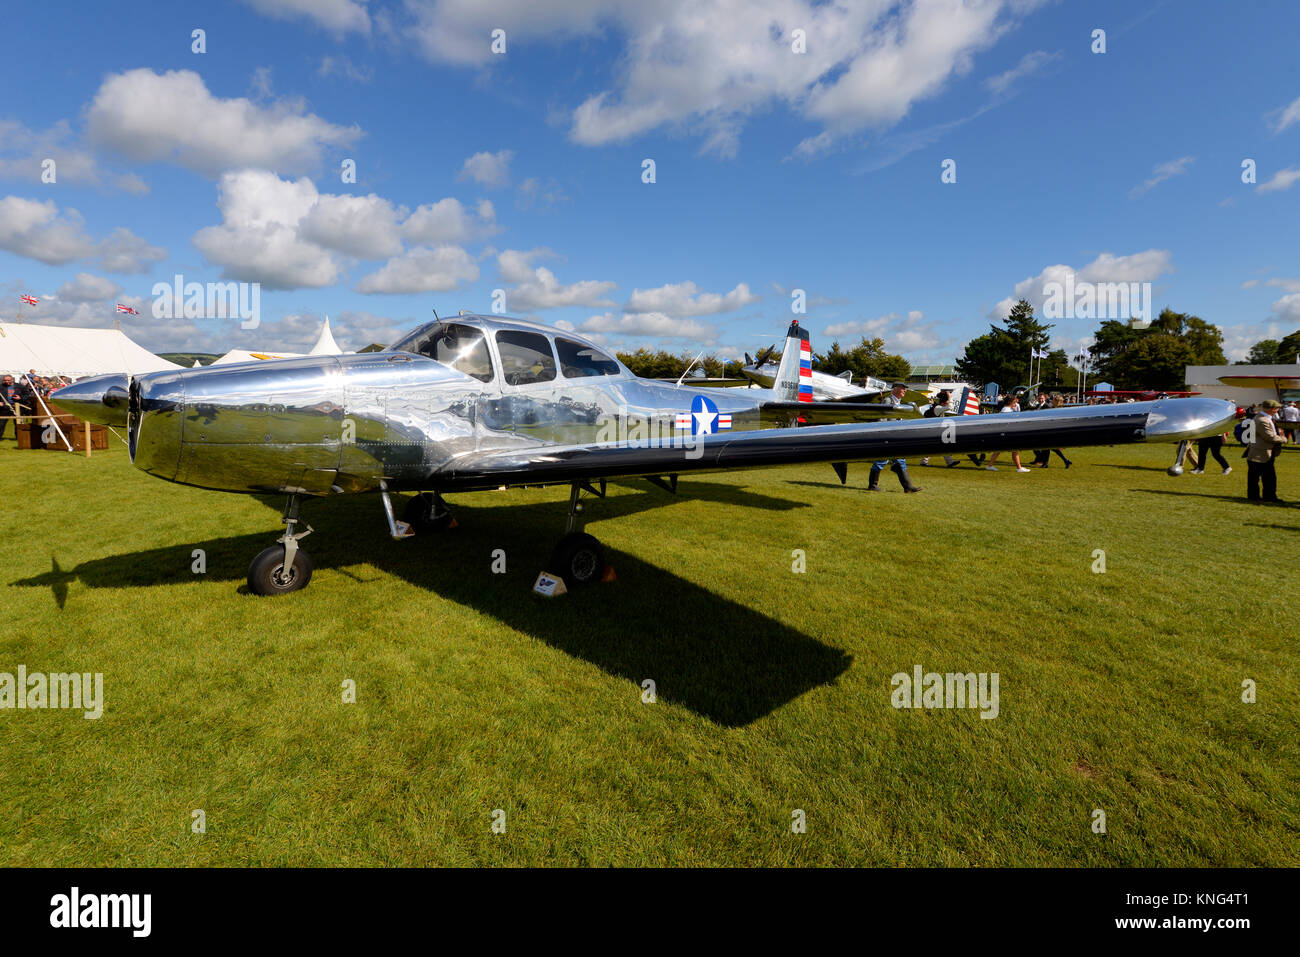 North American L-17A Navion plane in the Freddie March Spirit of Aviation Goodwood Revival 2017 Stock Photo